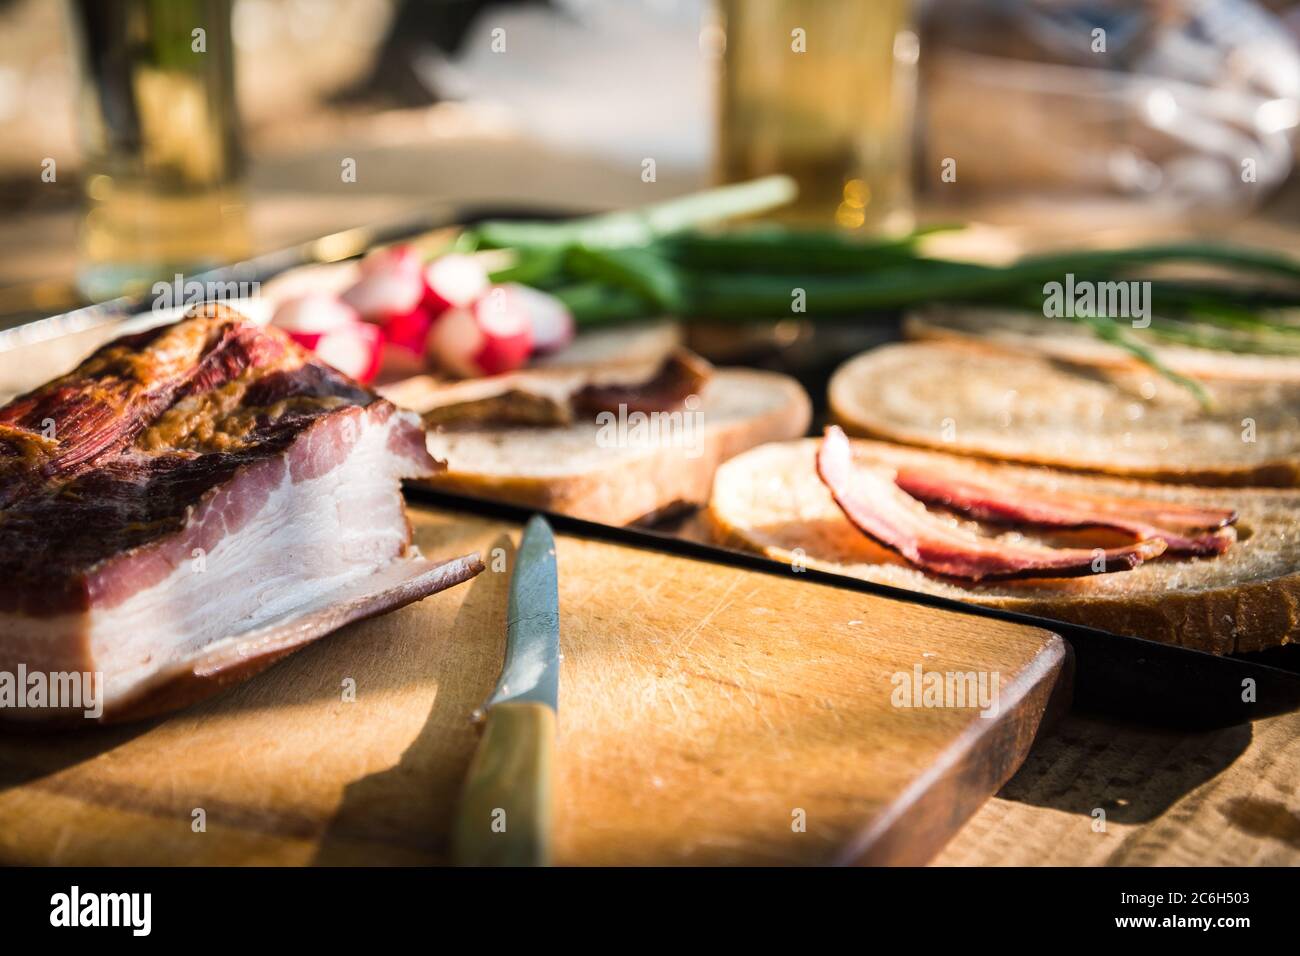 Bacon and knife on a wooden desk. Grilled bacon slice on fatty bread, green onion and fresh radish in the background on a hungarian summer grill party Stock Photo